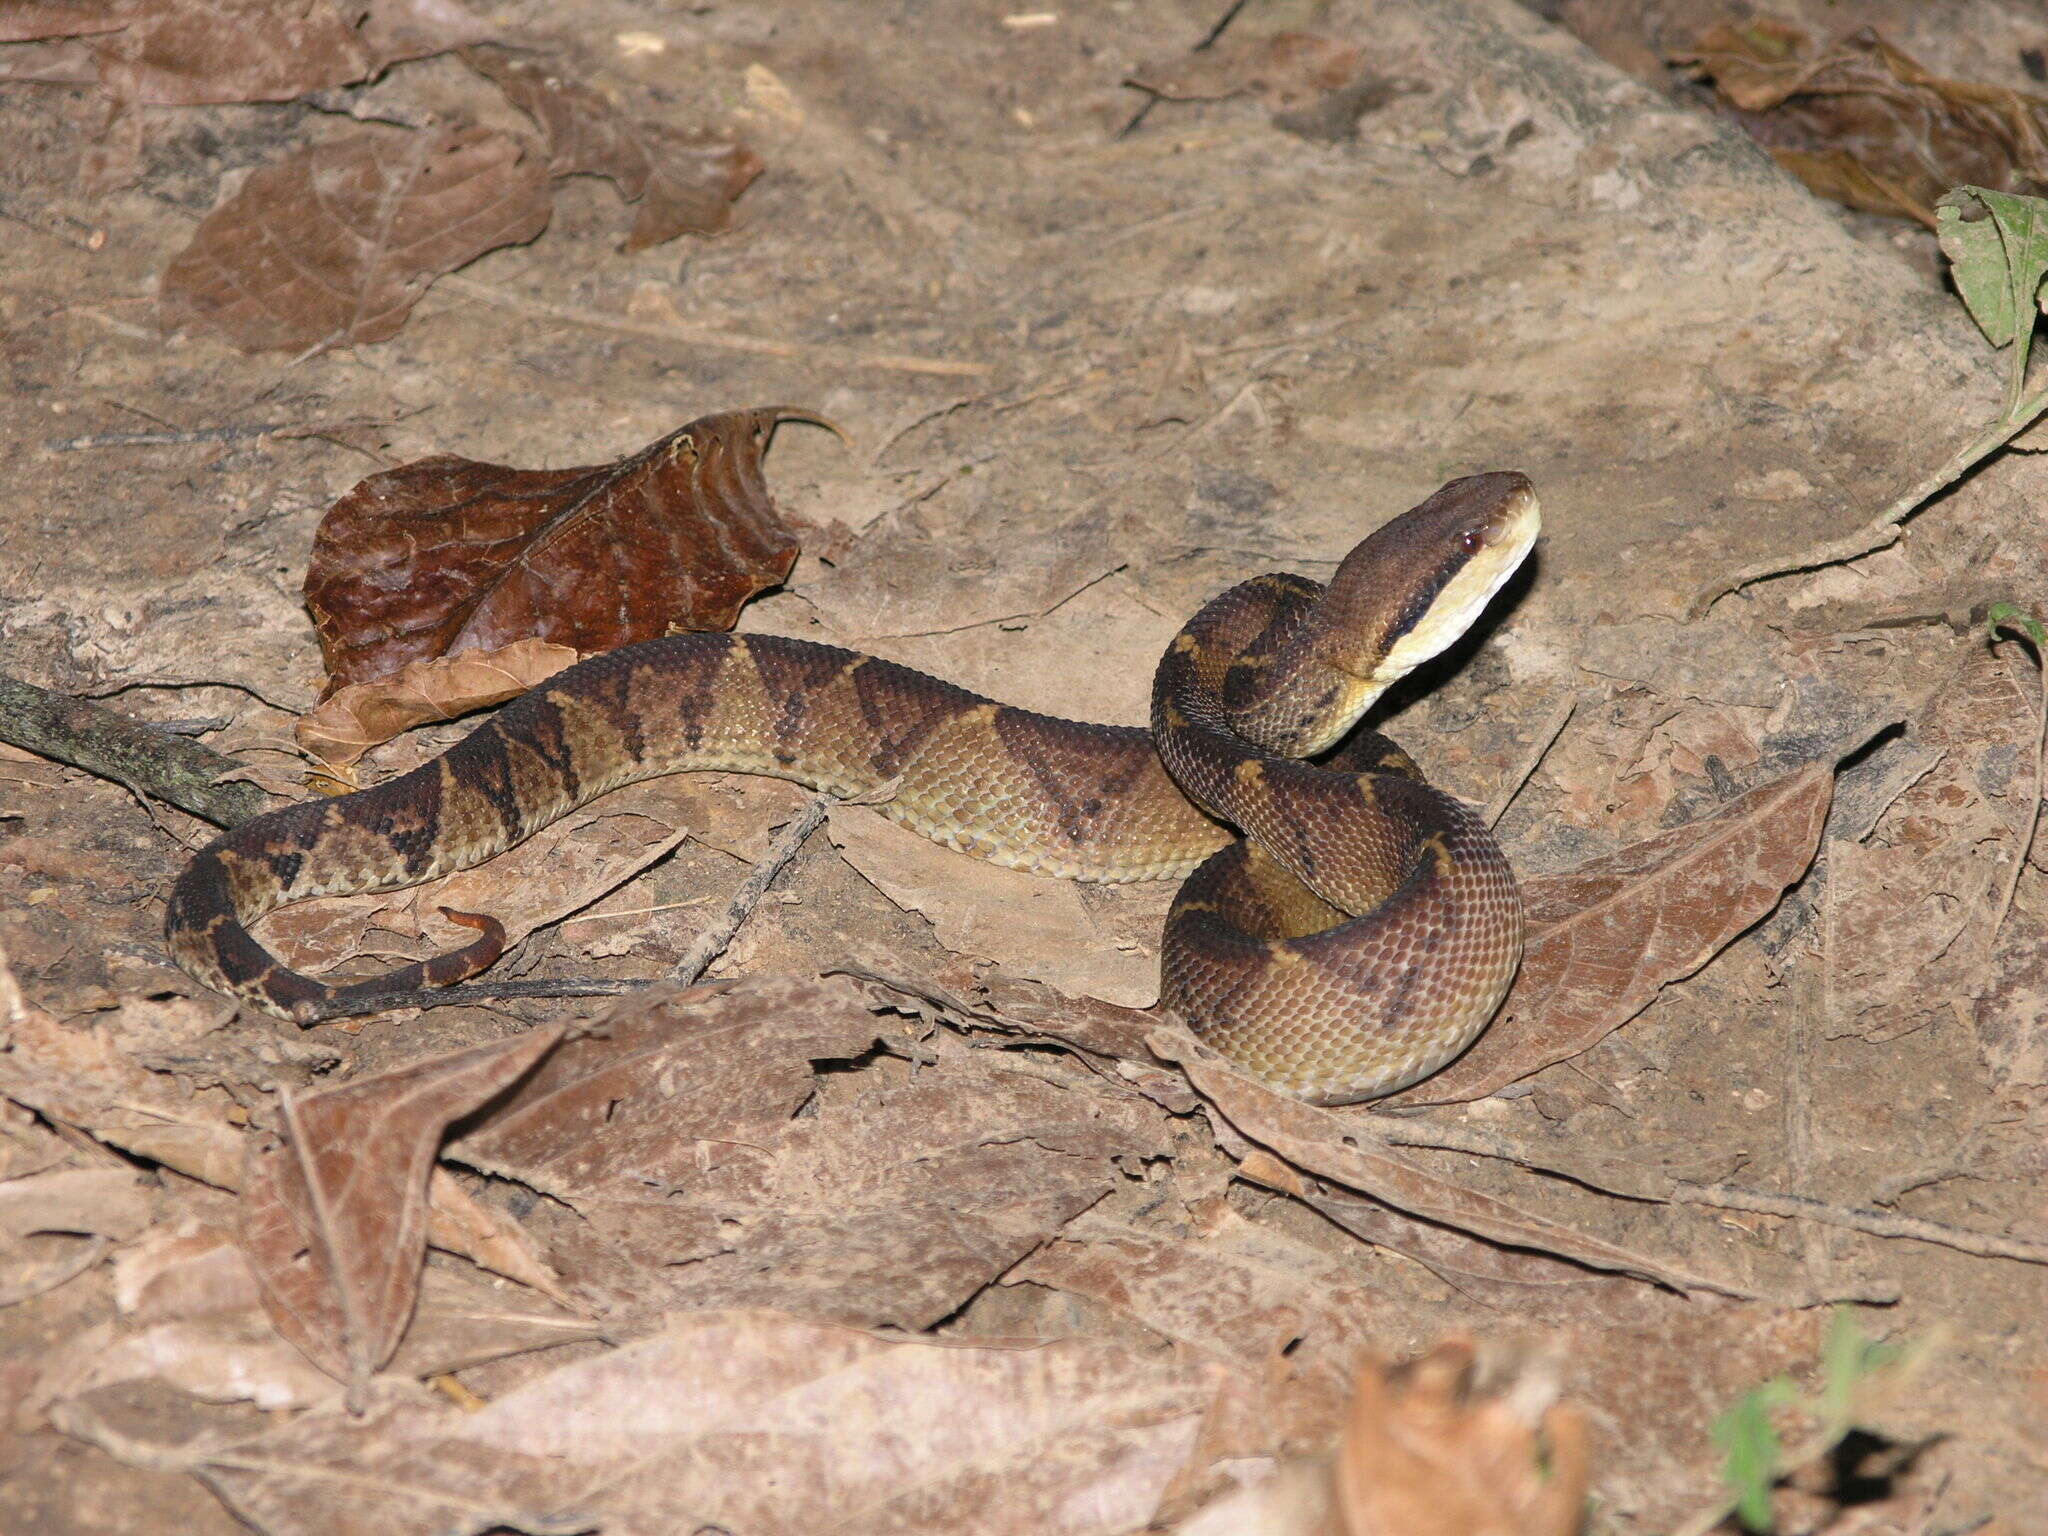 Image of Central American bushmaster